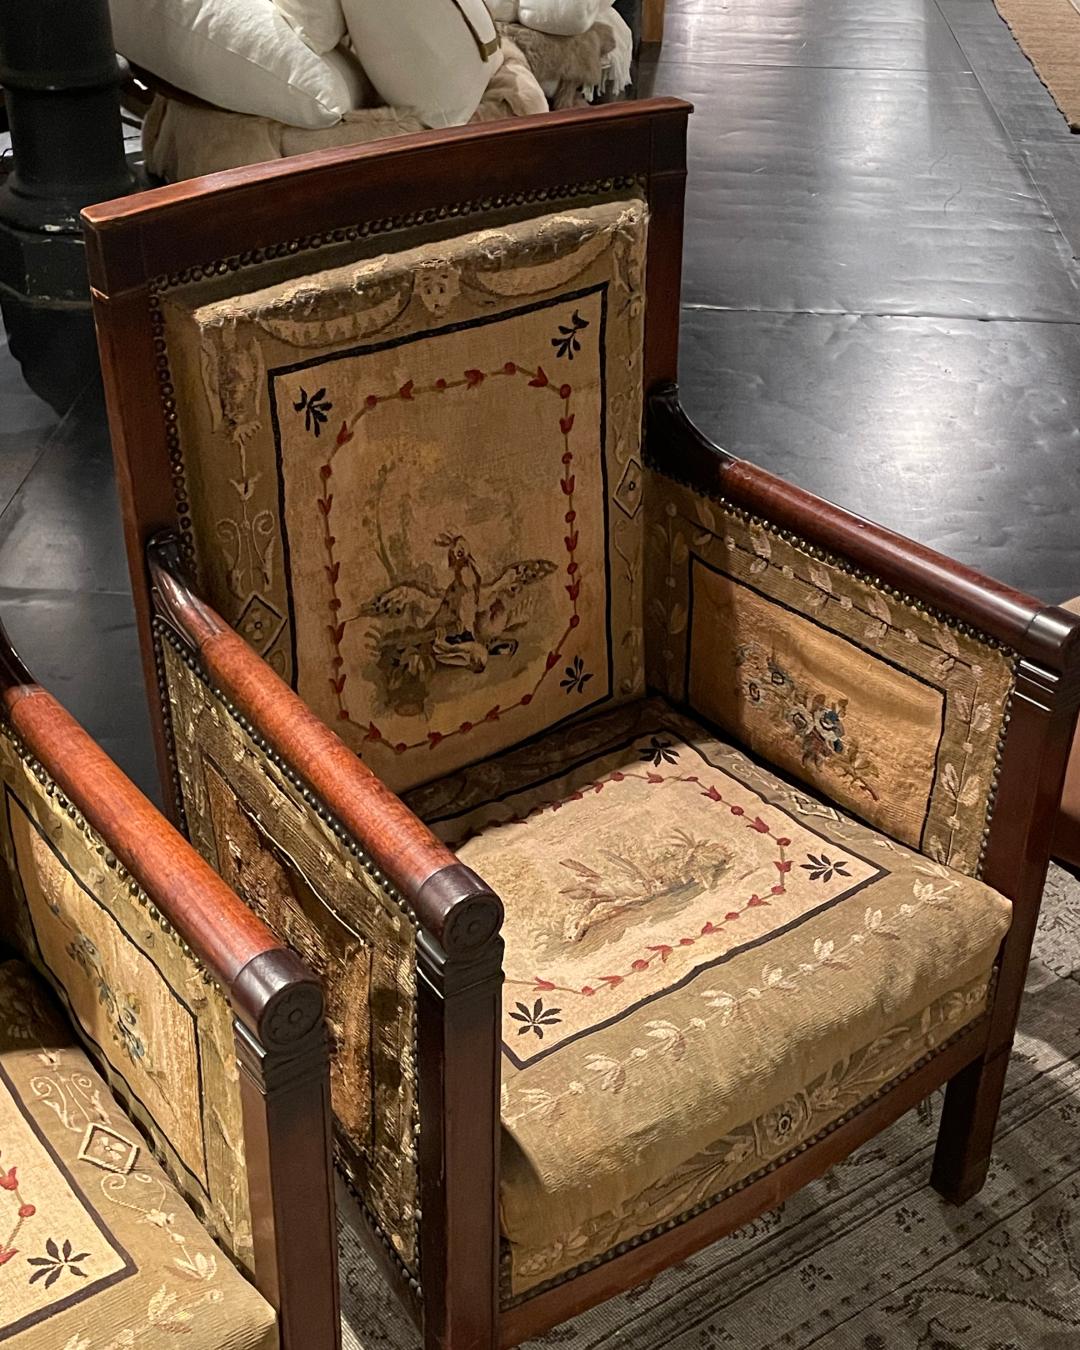 Immerse yourself in the captivating allure of a pair of French Empire armchairs from 1810. Fashioned in rich mahogany, these exquisite chairs epitomize the Empire style, boasting upholstered backs, seats, and arms adorned with the original tapestry